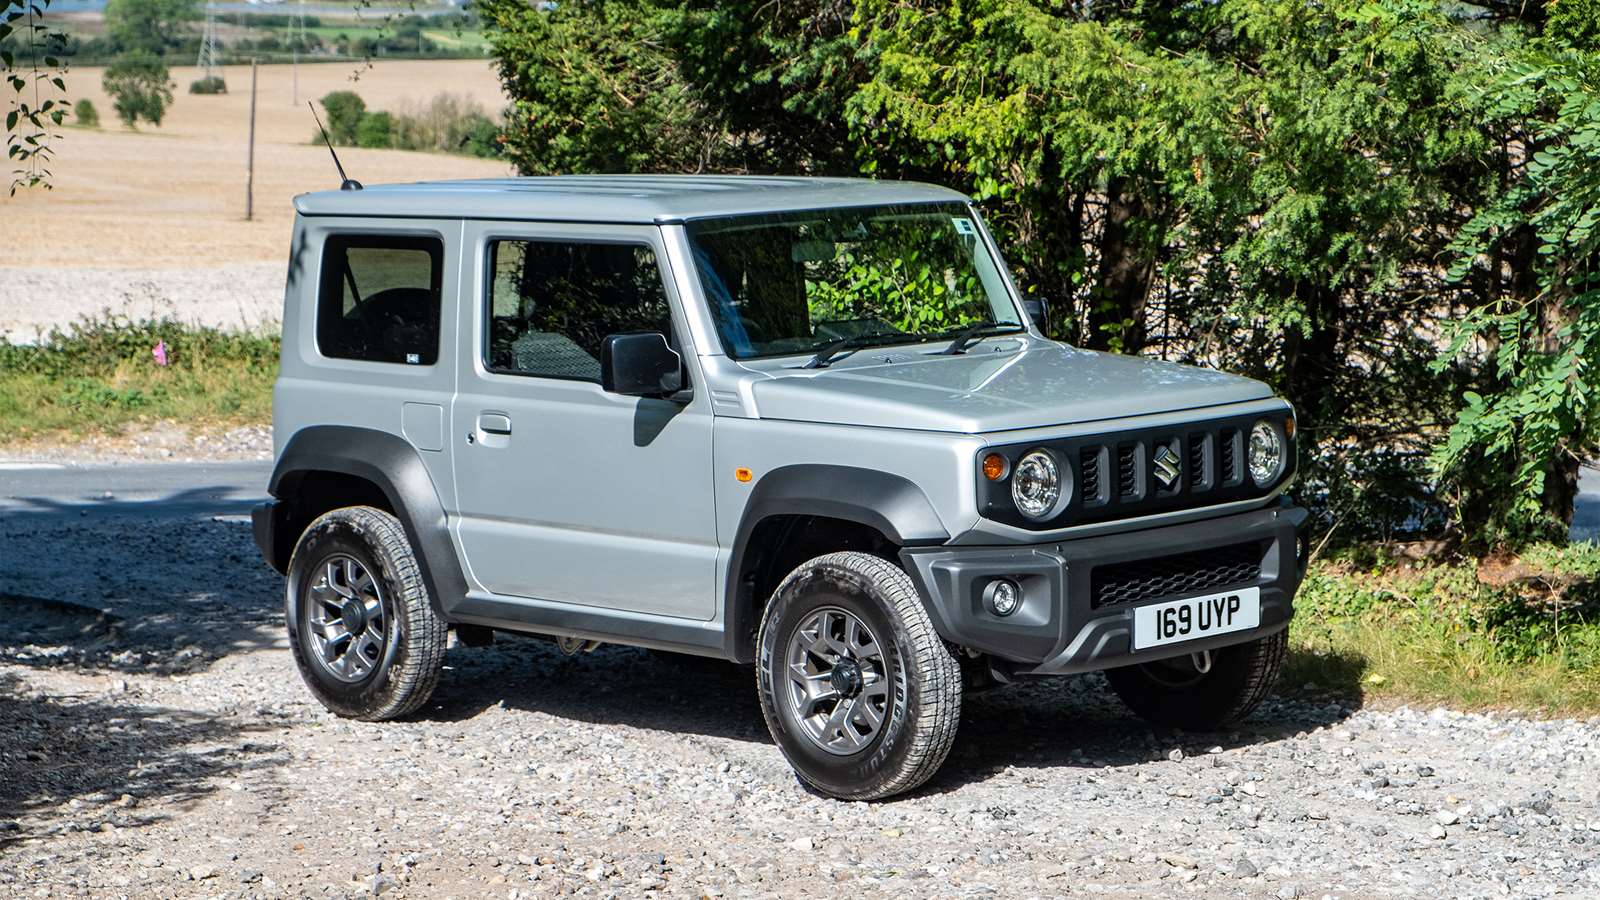 The Suzuki Jimny will stay on sale, for now GRR